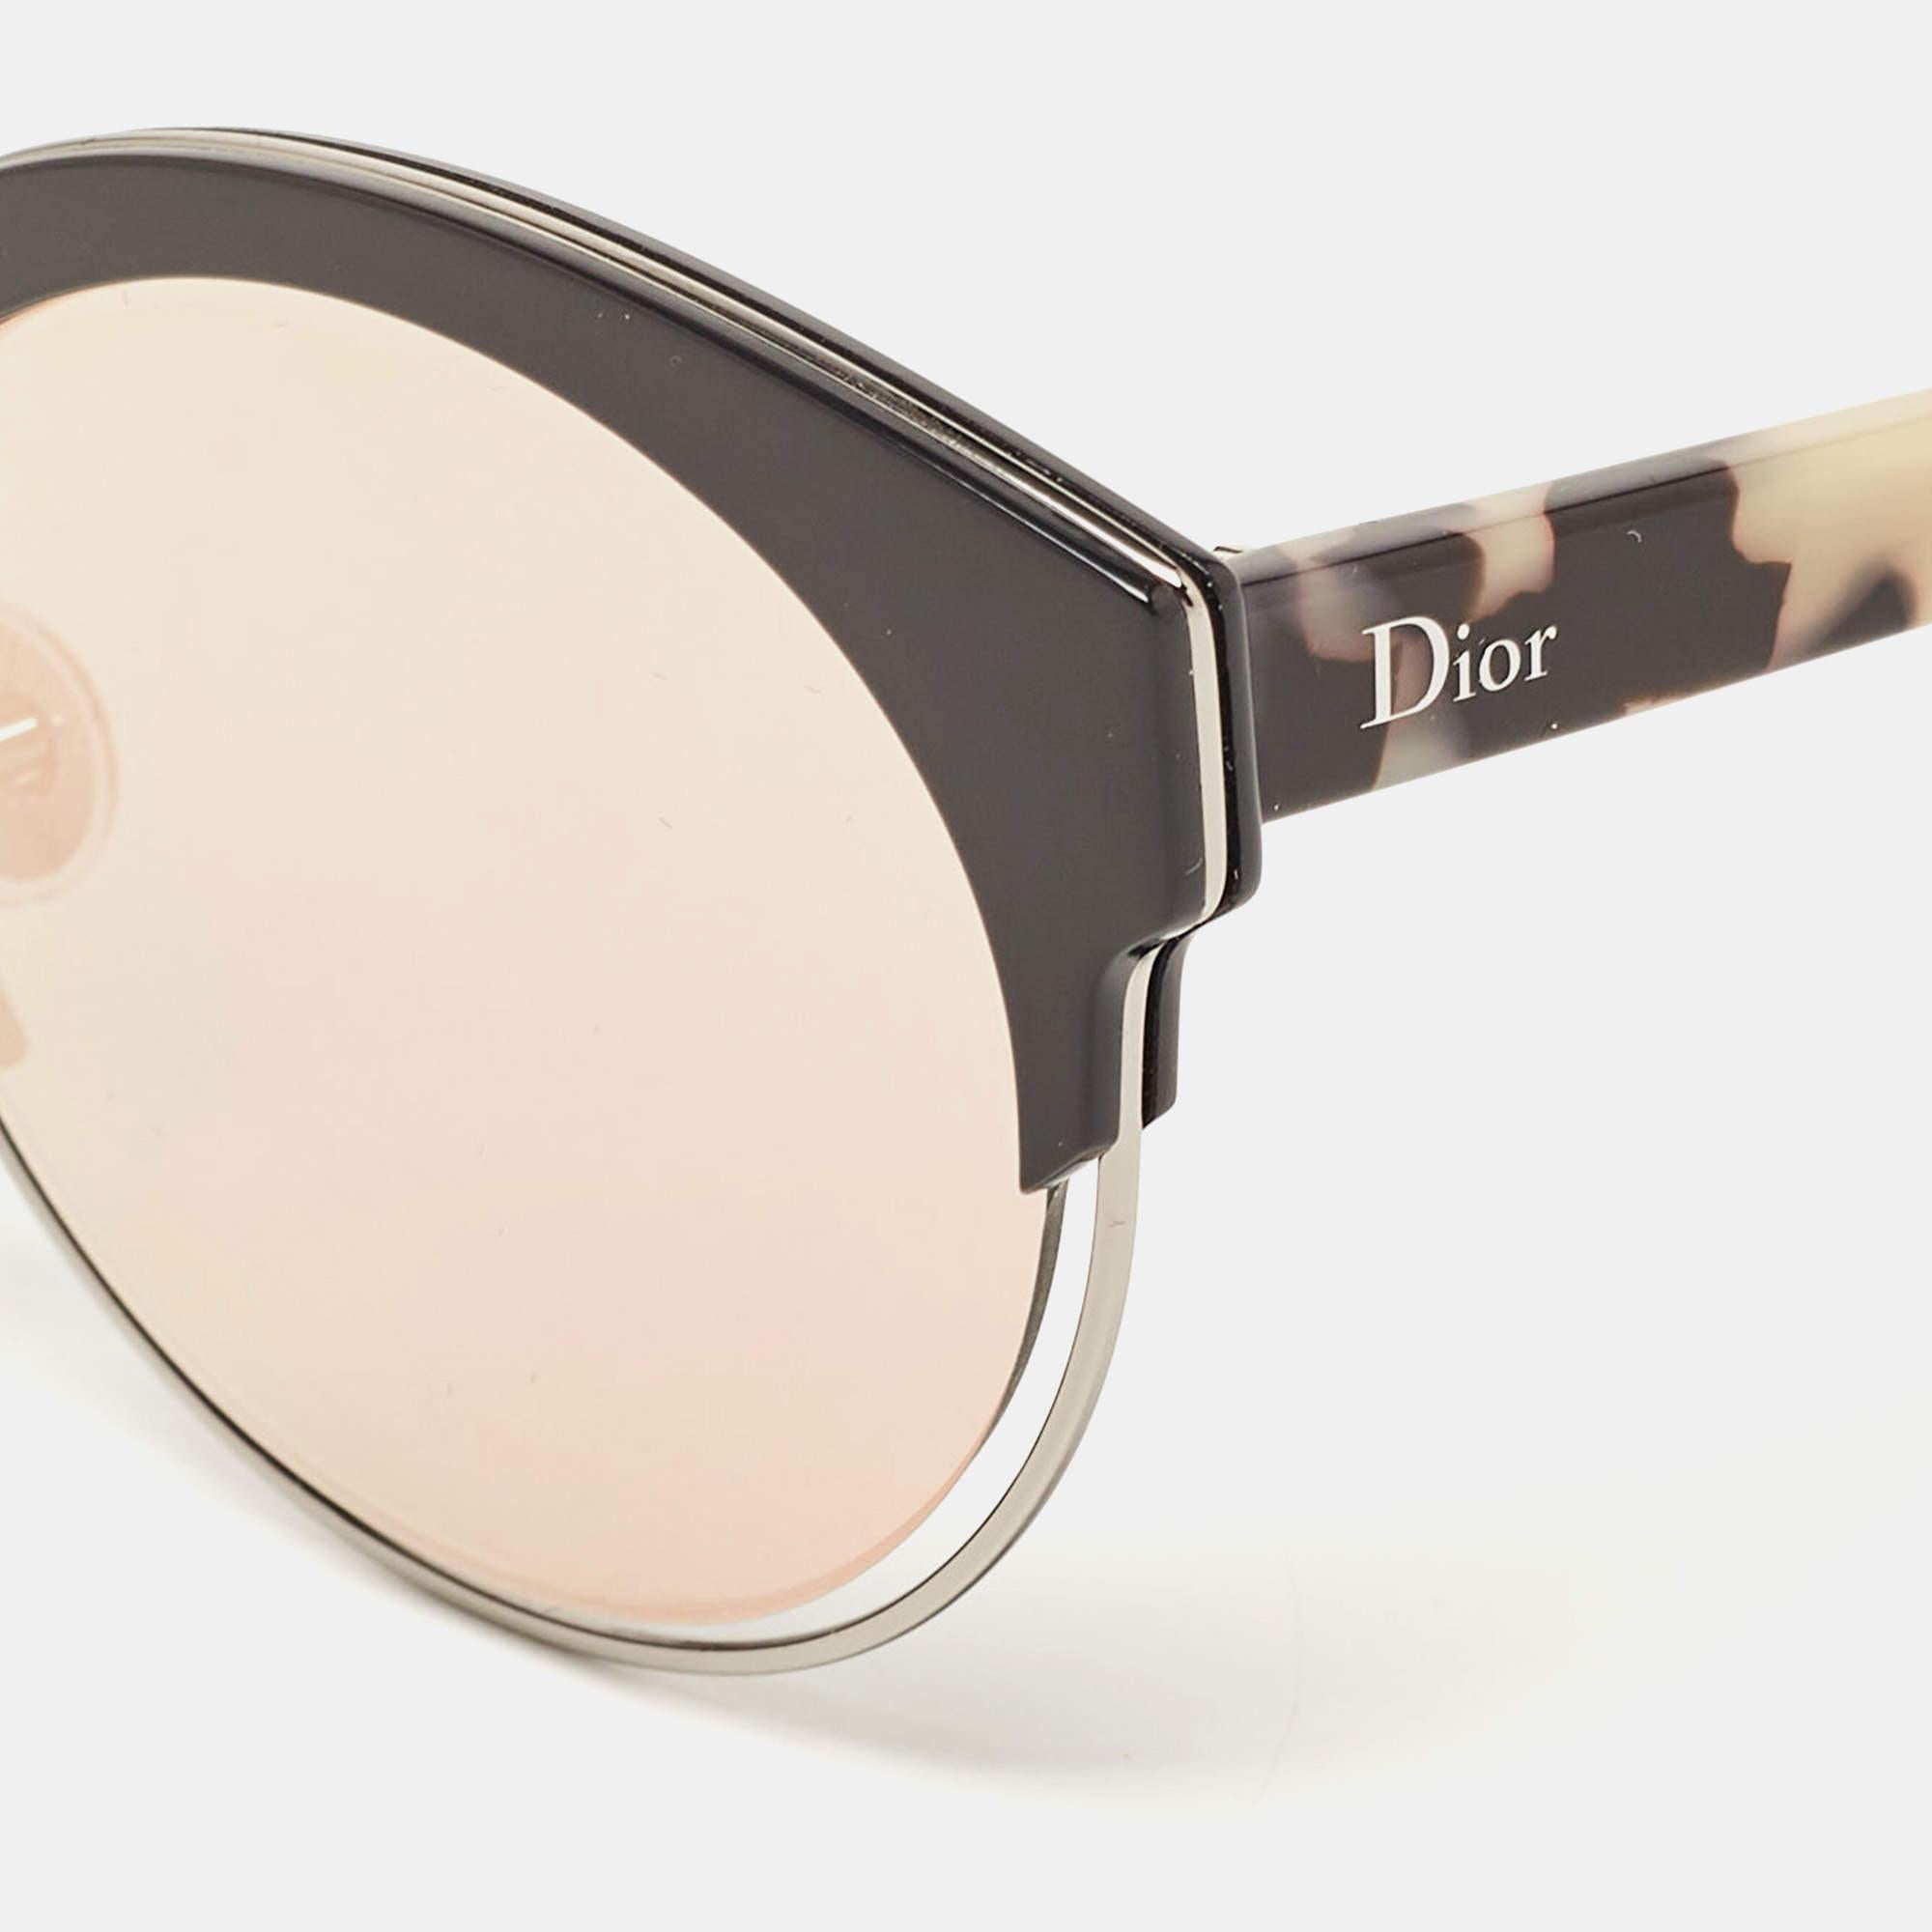 A fashionista like you deserves the best, like these sunglasses from Dior. Styled to express your style eloquently, these sunglasses feature the signature on the sides. While its design makes you stand out, the lenses protect your eyes.

Includes: